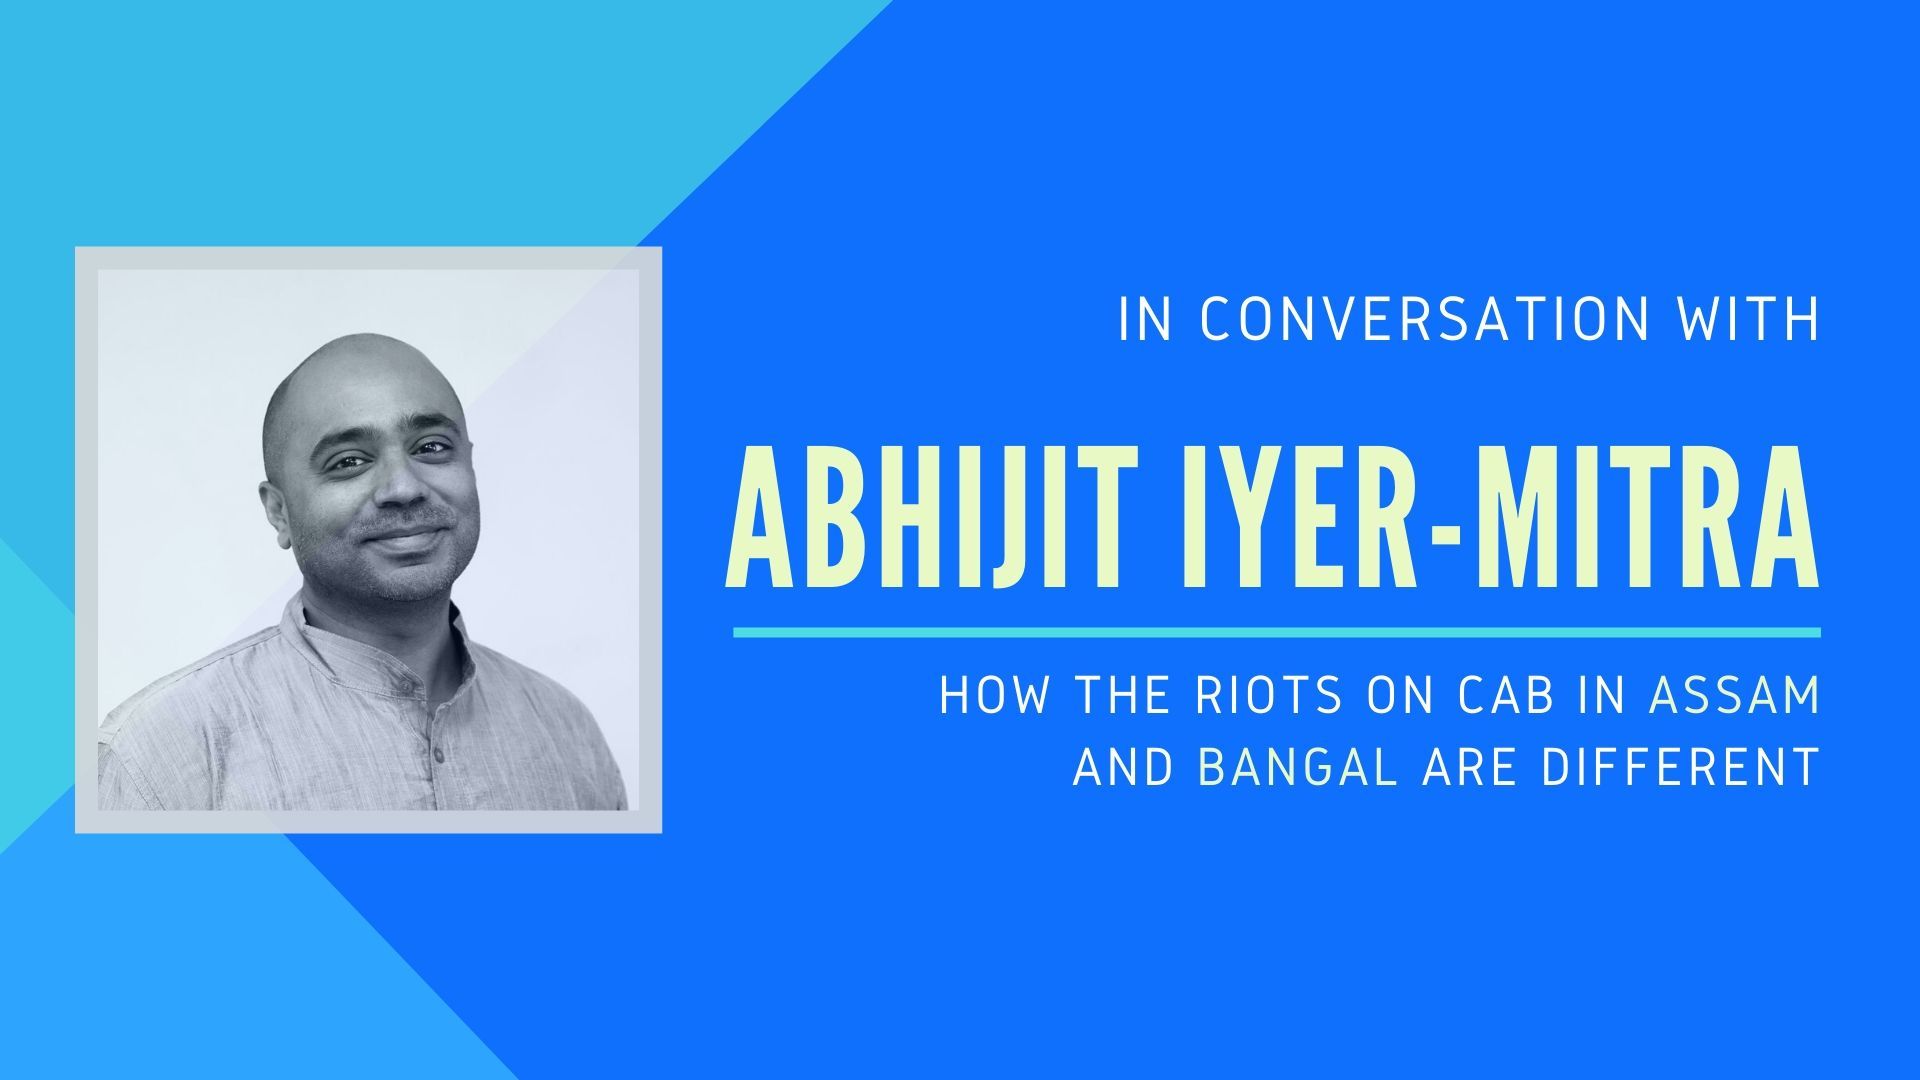 In-depth look at the issues in Assam and Bangal and why the two riots are different. Abhijit Iyer-Mitra also touches upon what is happening in the universities...